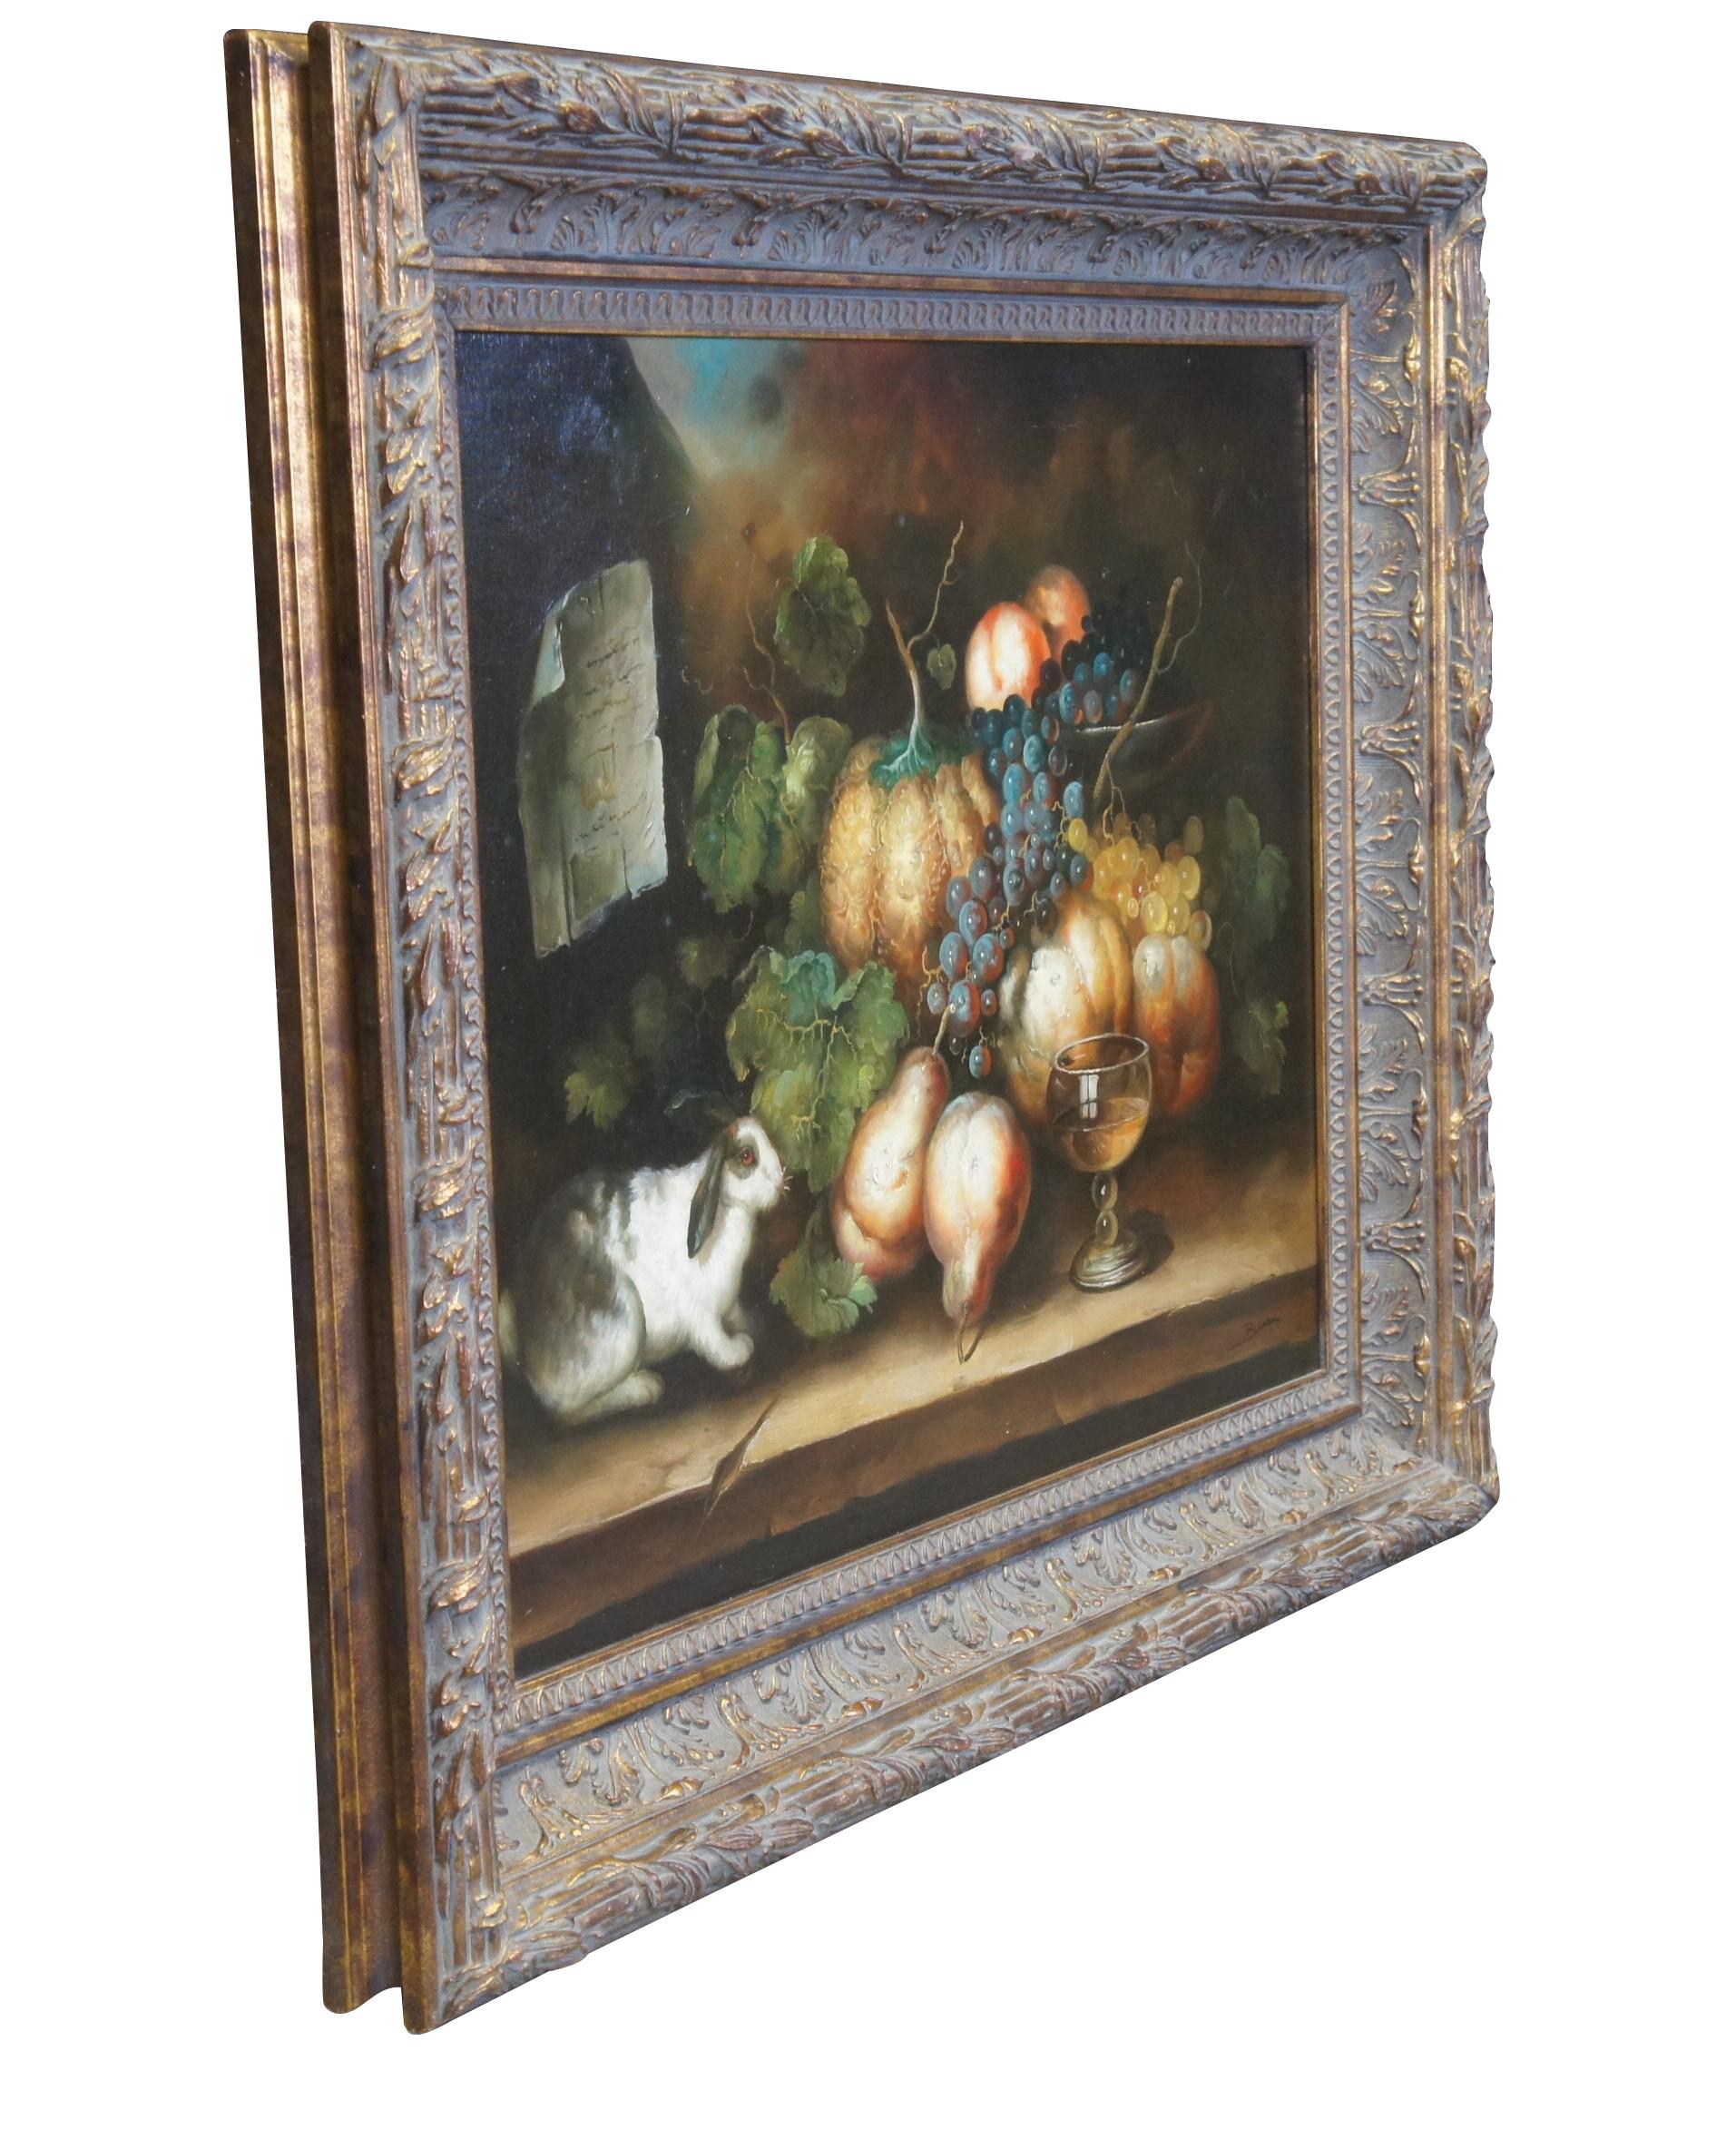 Vintage Bluhm still life oil painting on canvas featuring a bunny / rabbit next to a spread of lettuce, pears, peaches, gords / pumpkin, wine and grapevines on an old farmhouse table.  Signed lower right.  Framed in gold frame with leaves and floral